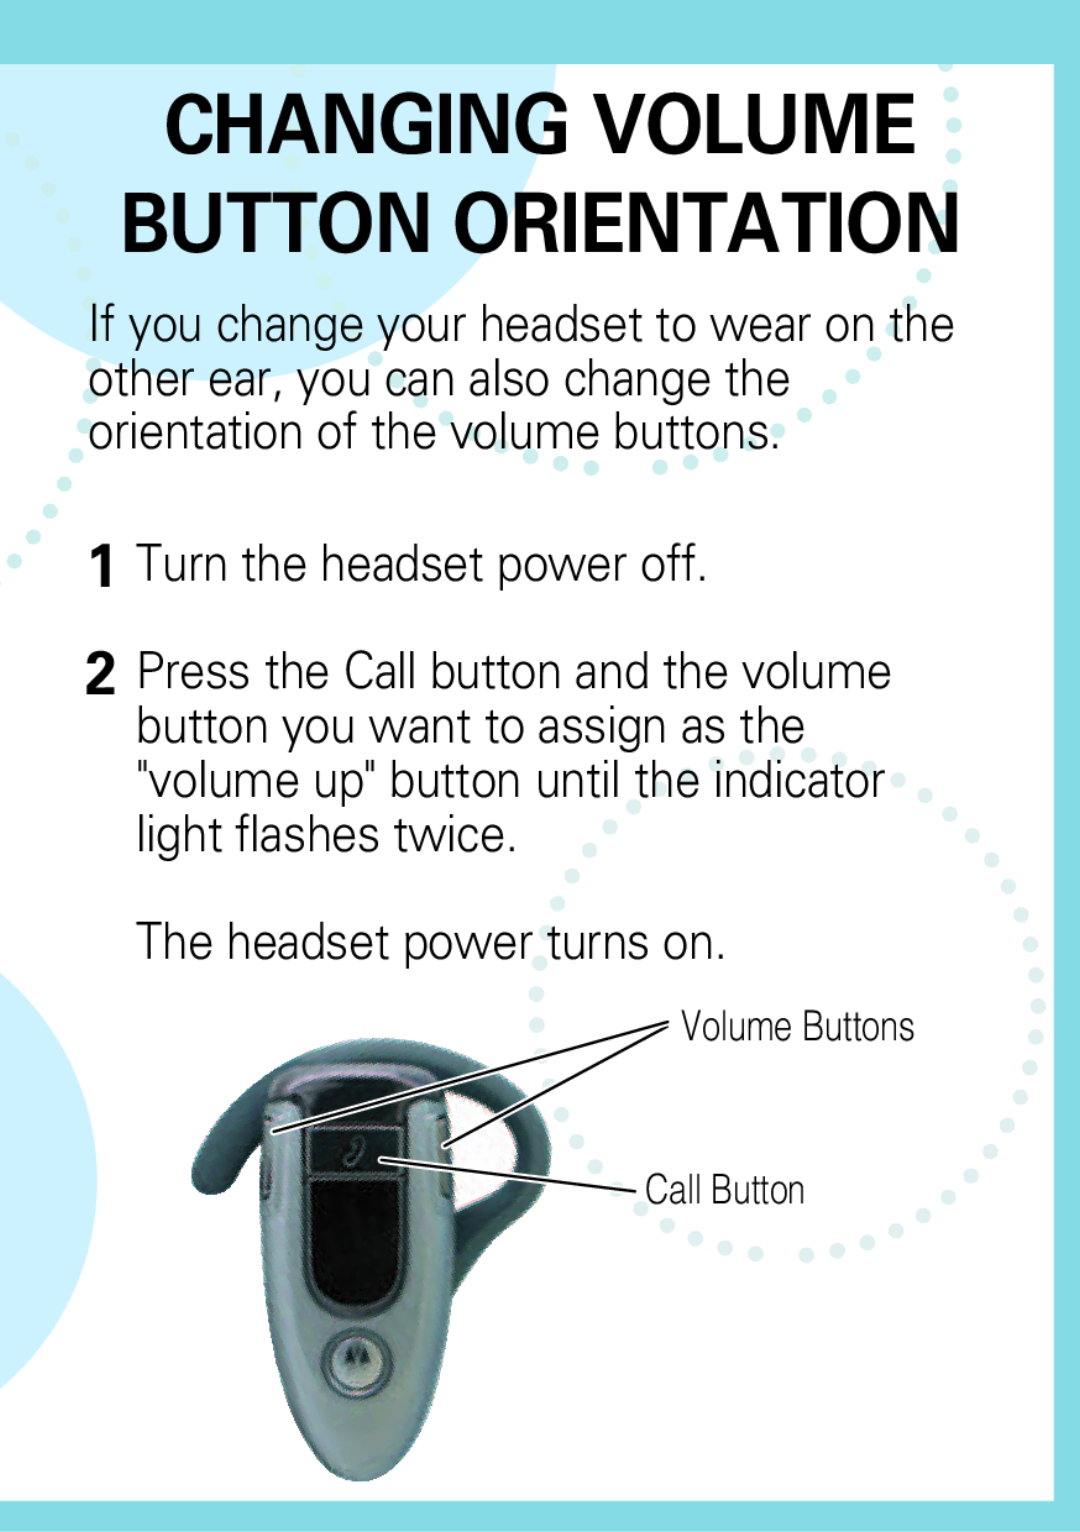 Motorola H500 manual Changing Volume Button Orientation, Turn the headset power off, The headset power turns on 